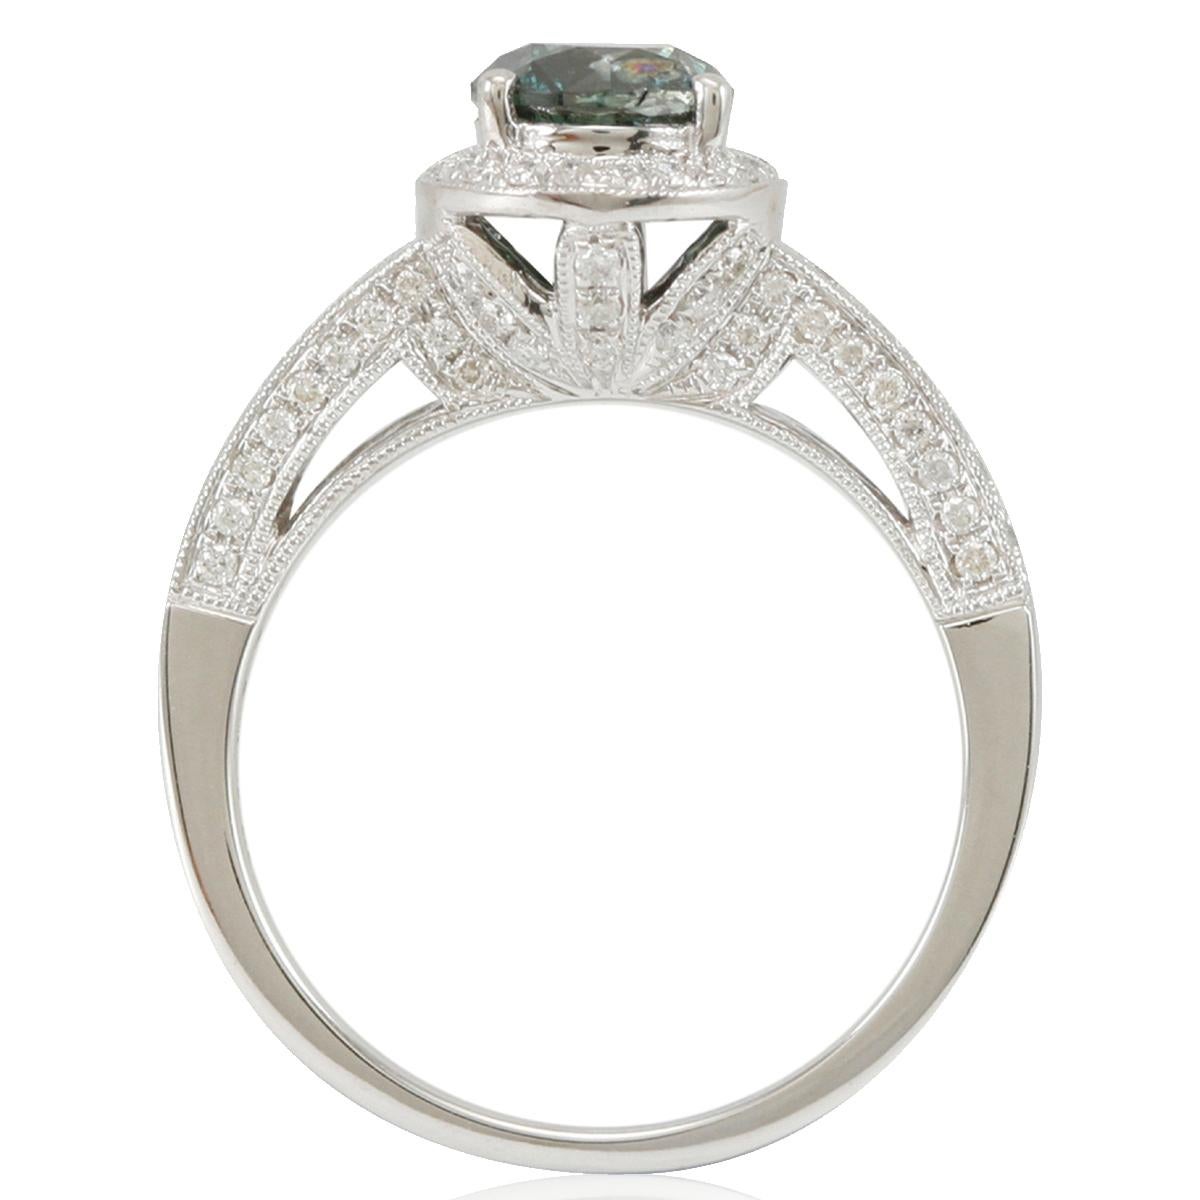 Watch her eyes light up with joy when you present her with this dazzling blue-green and white diamond ring from Suzy Levian. A graceful array of white diamonds .51ct highlight the vivid beauty of a single round-cut blue-green diamond 1.17 with